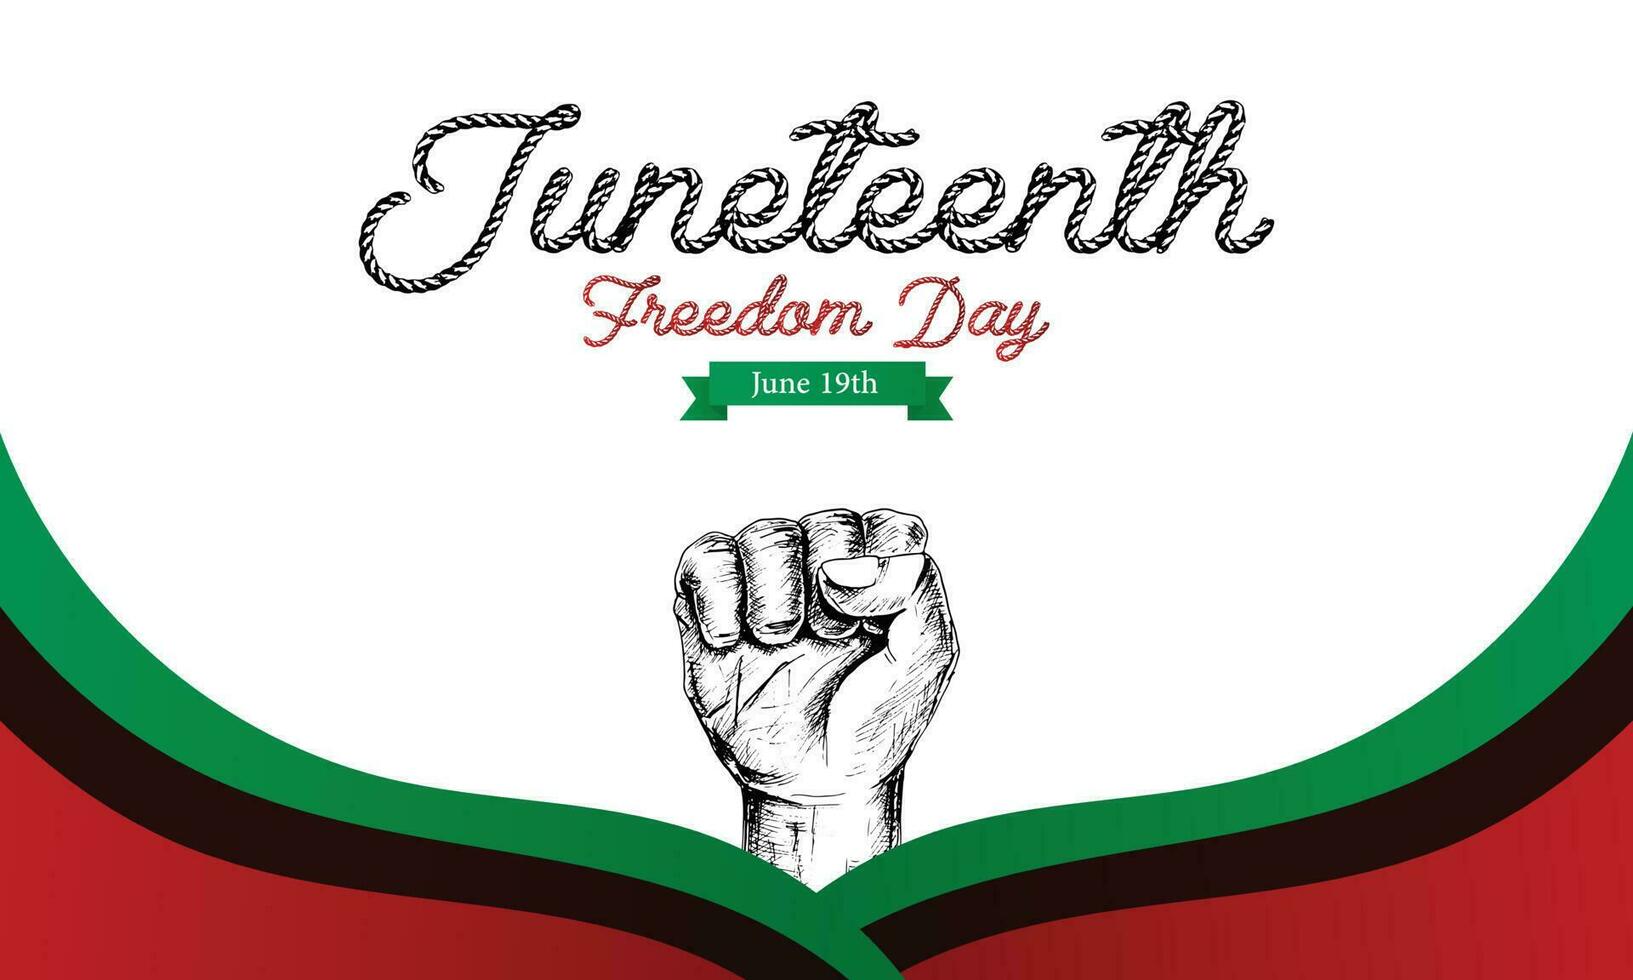 Juneteenth day, Celebration freedom, emancipation day in 19 june, African-American history and heritage. vector